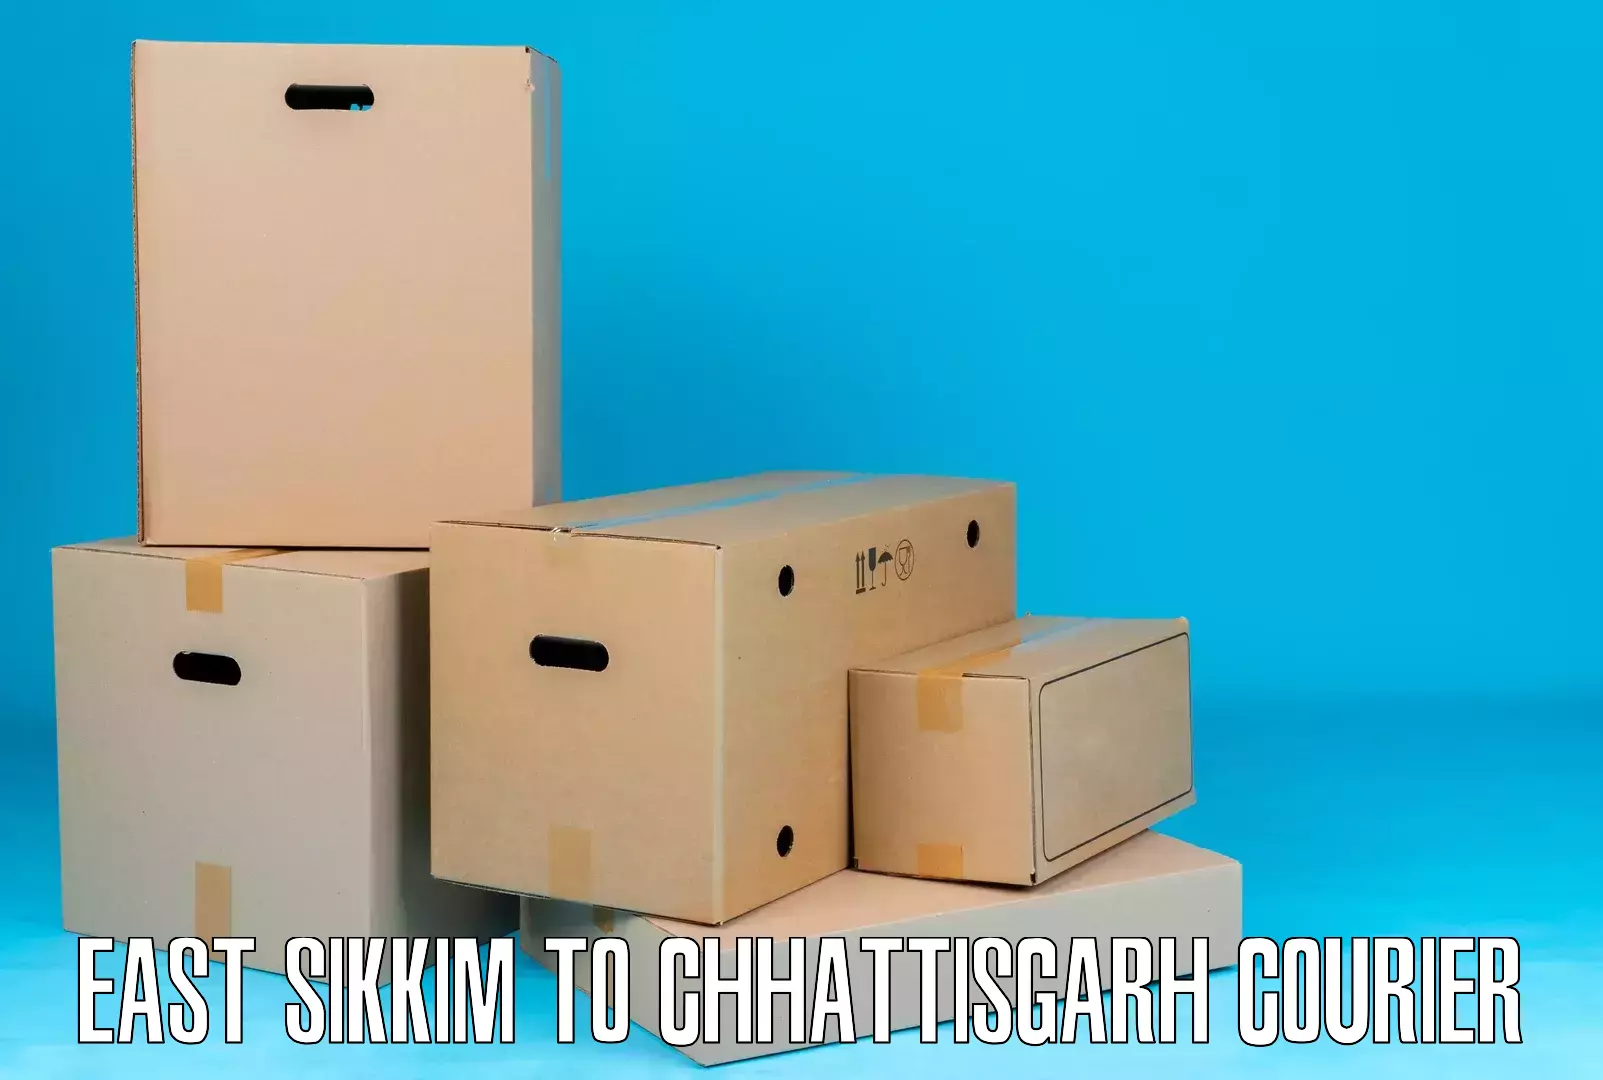 Courier app East Sikkim to Raigarh